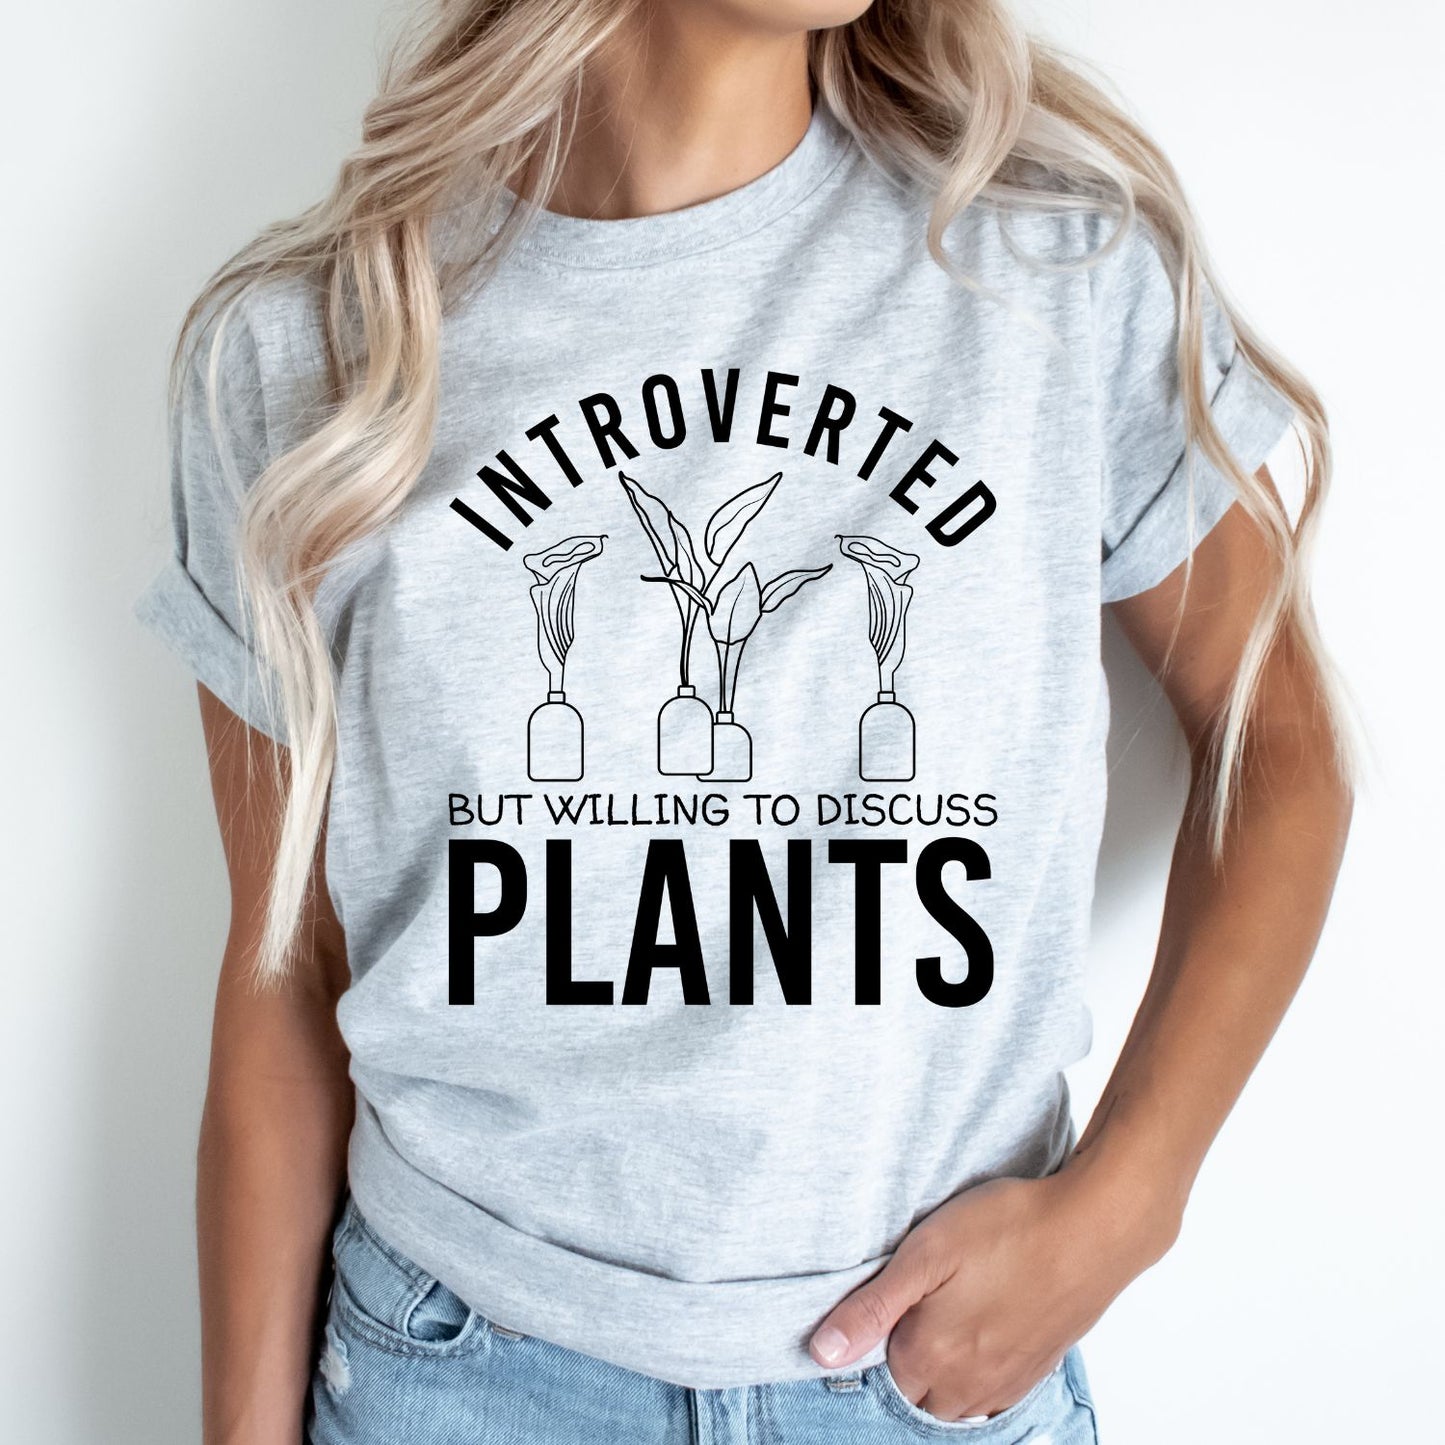 Introverted But Willing to Discuss Plants